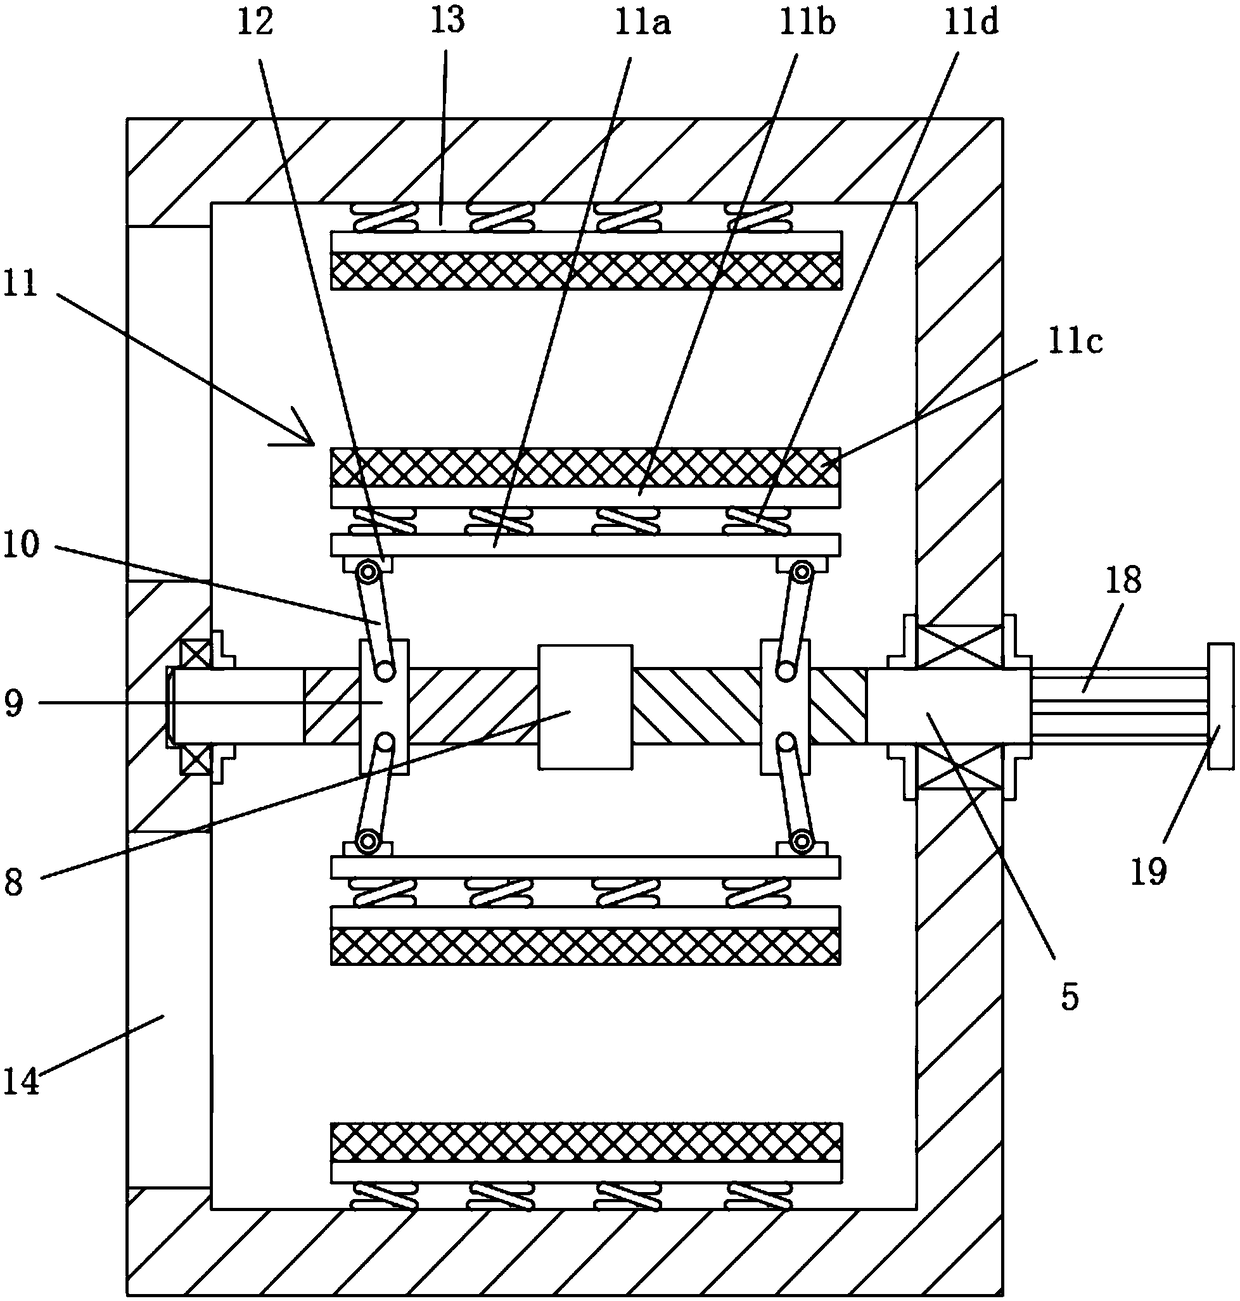 Self-walking material lifting and transport device